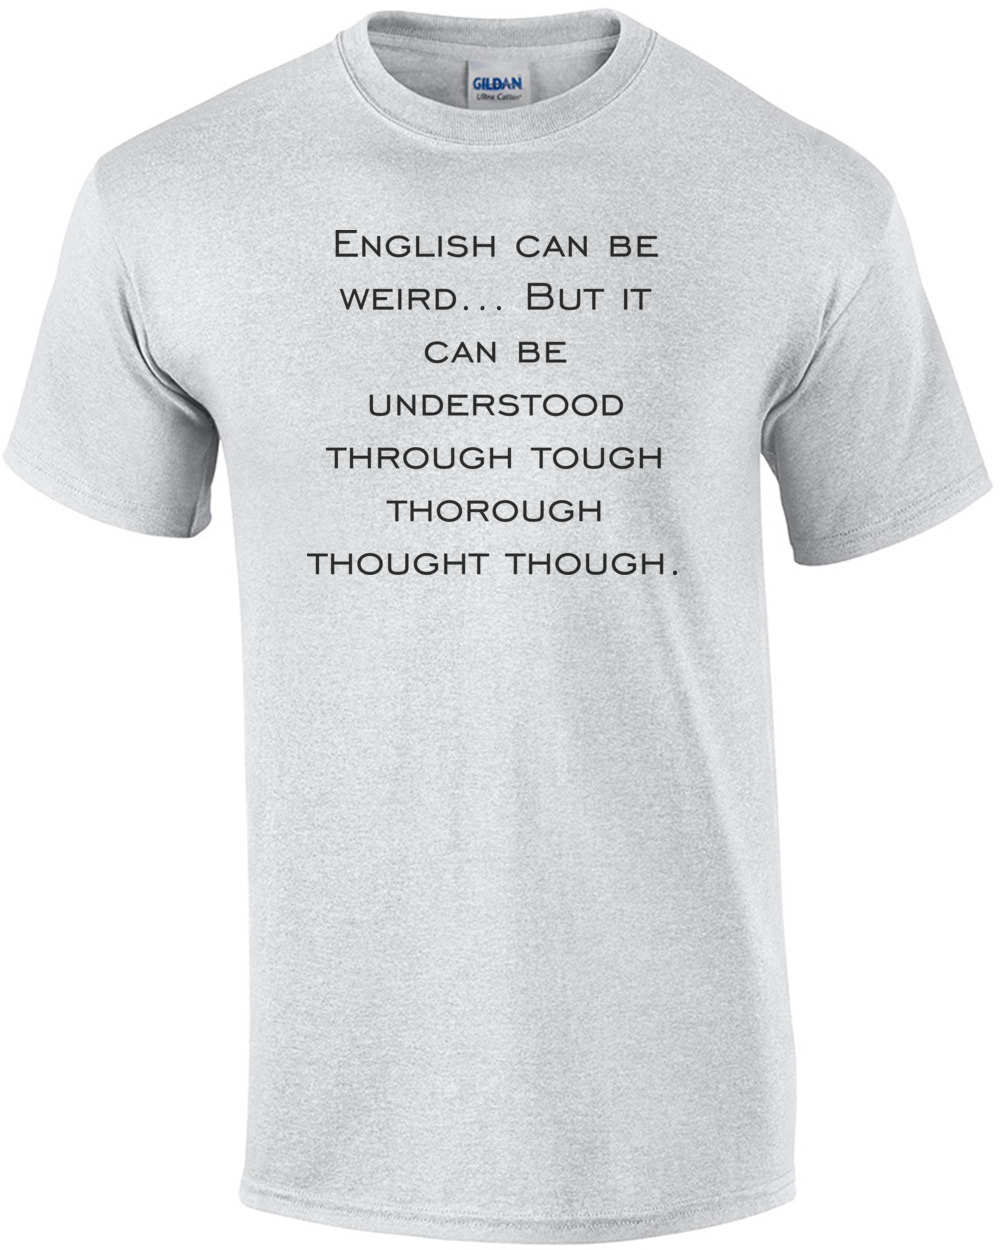 English Can Be Weird But It Can Be Understood Through Tough Thorough Thought Though Funny T Shirt